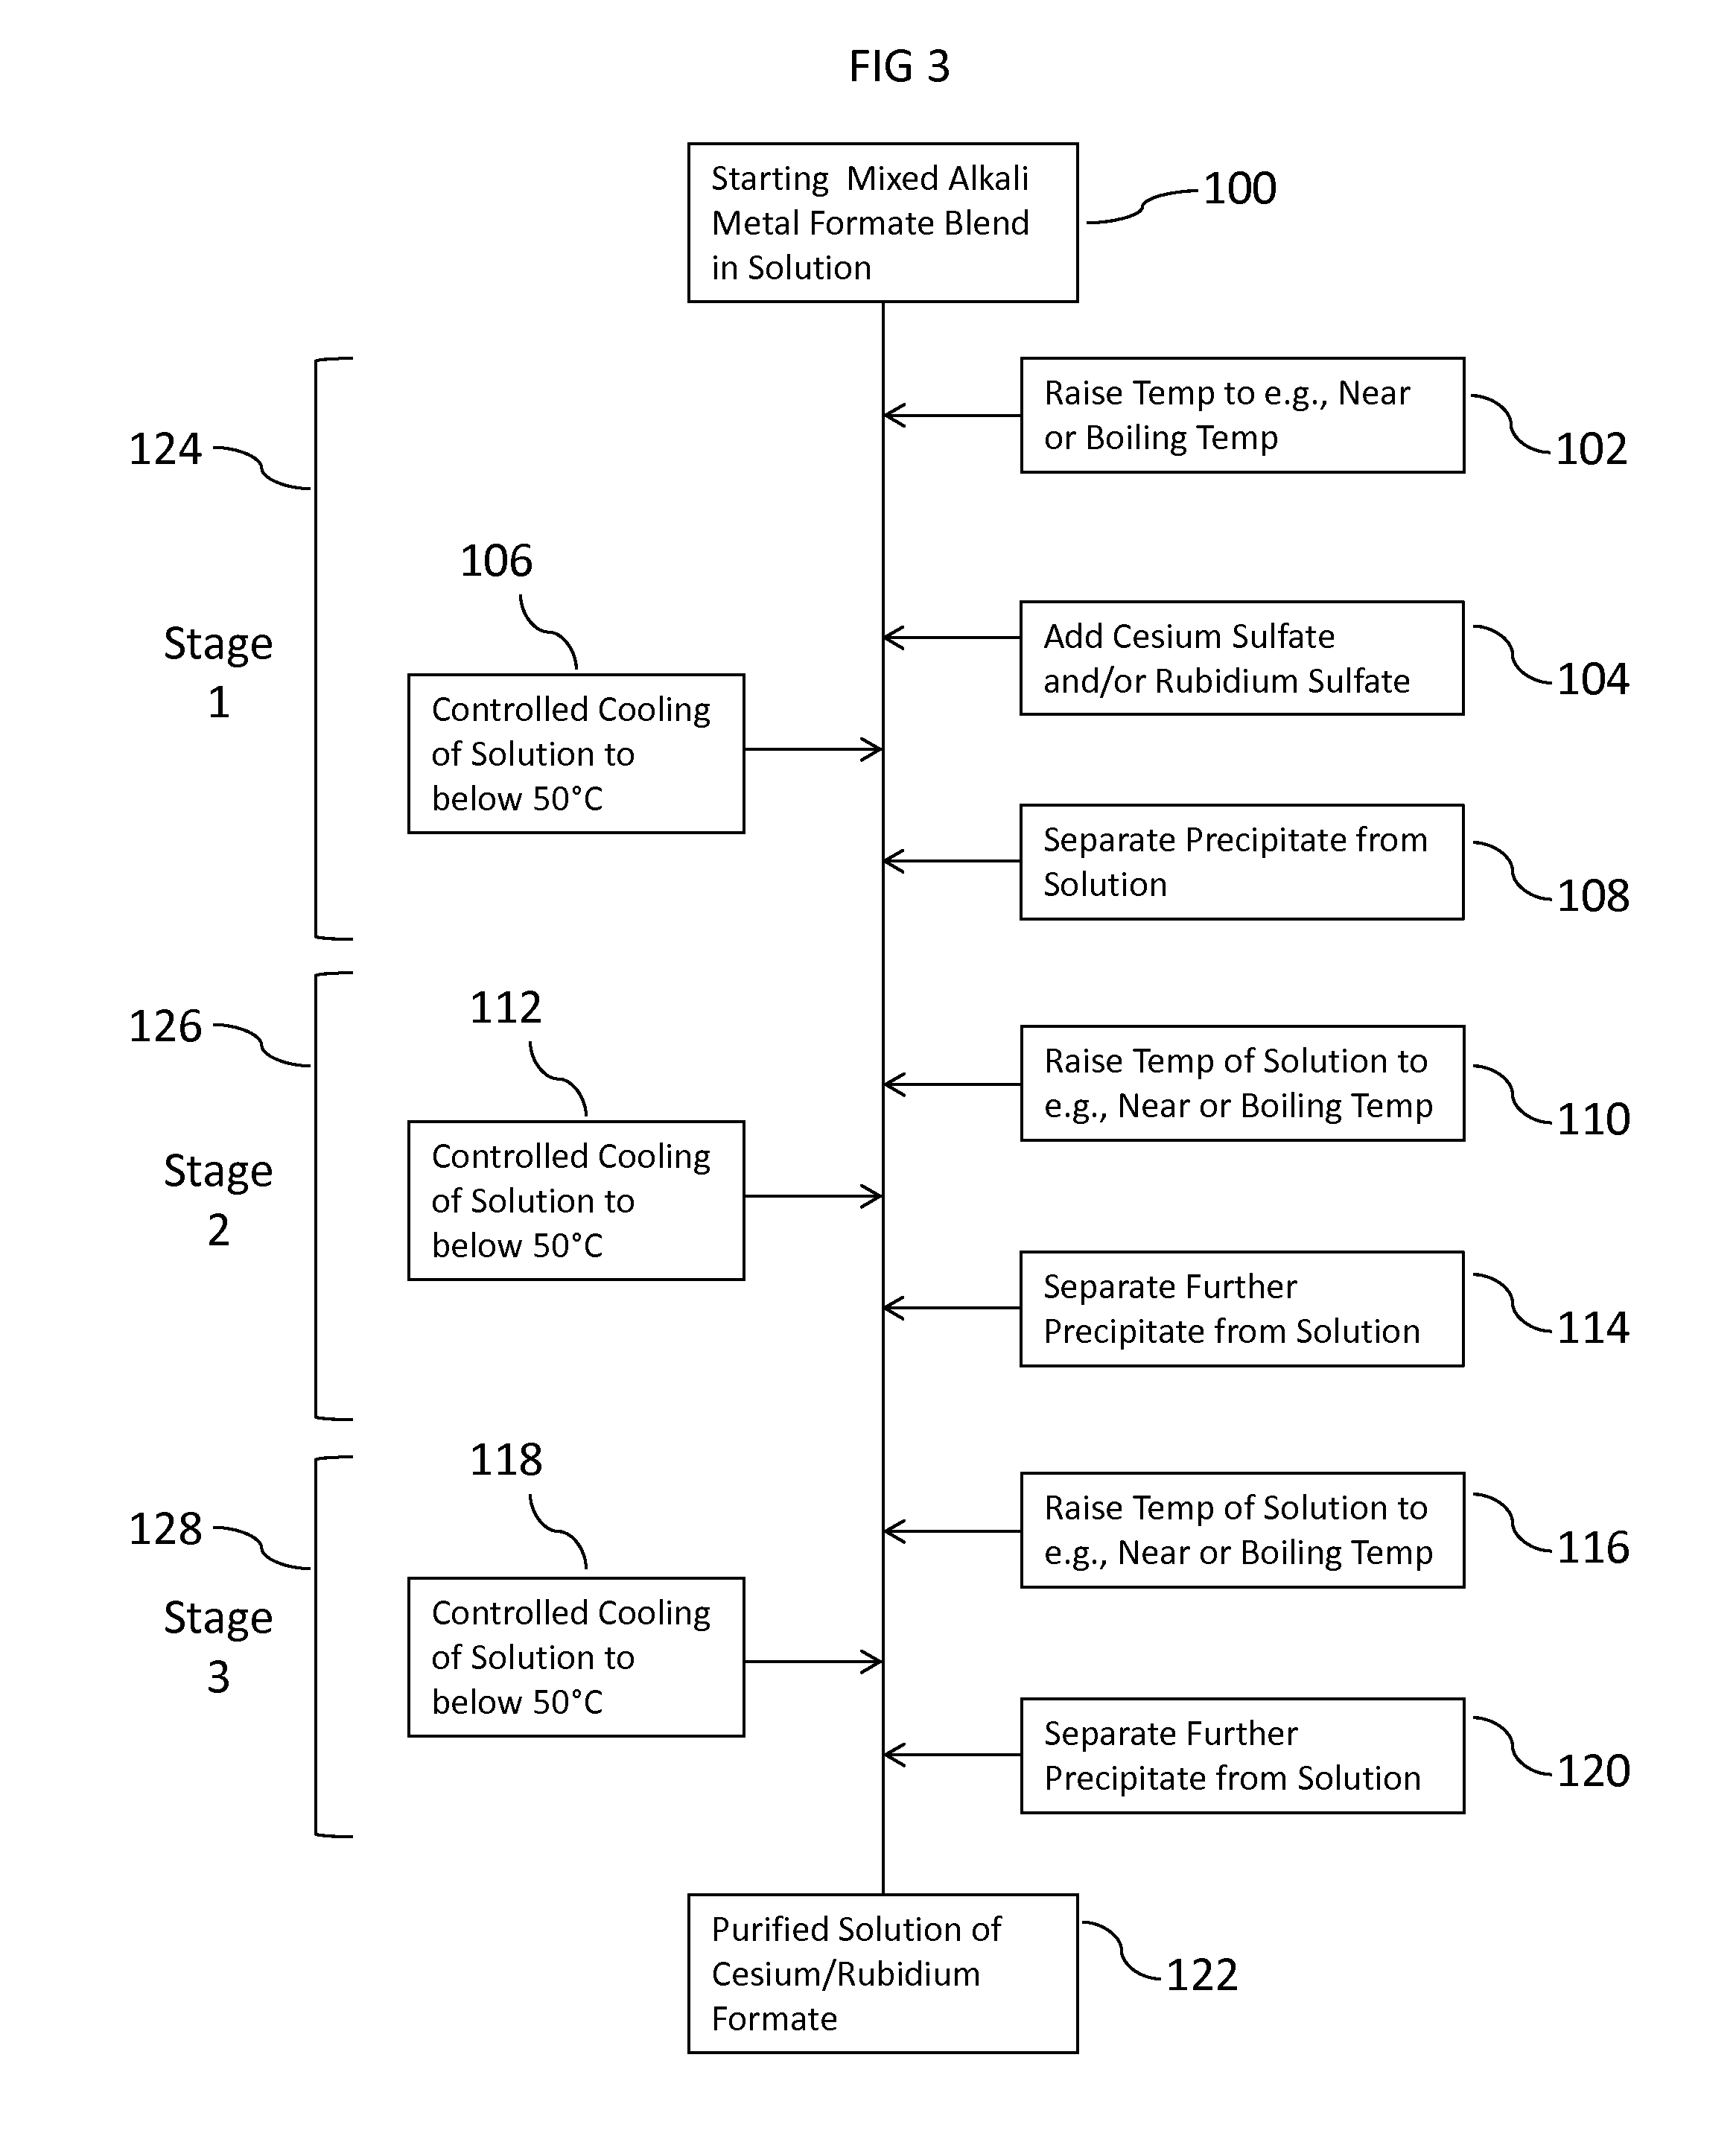 Methods to recover cesium formate from a mixed alkali metal formate blend